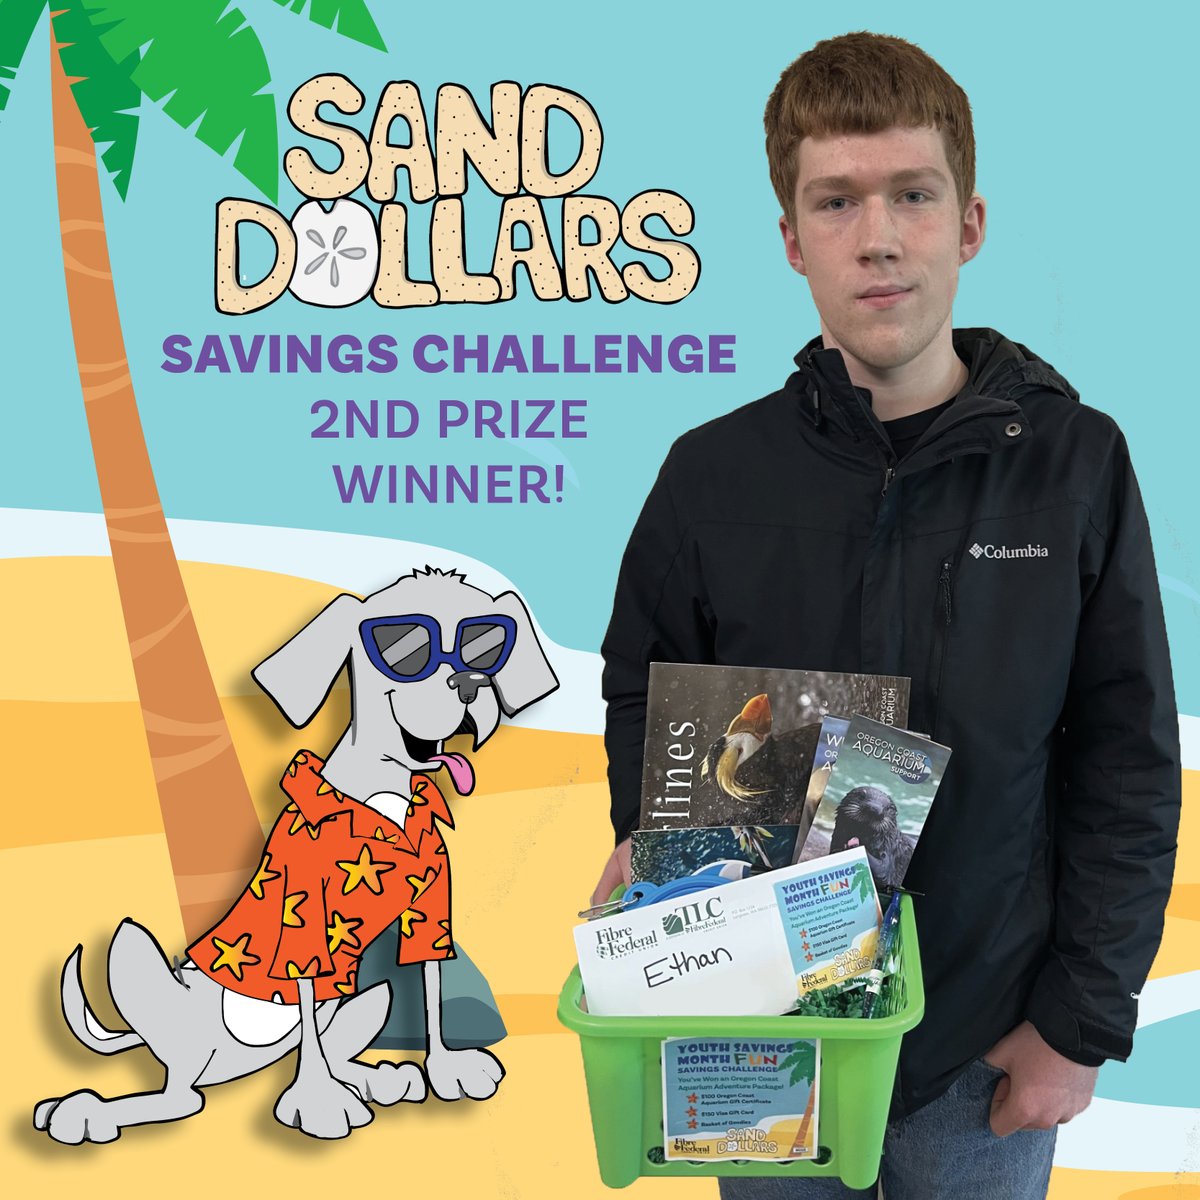 Ethan, our lucky Youth Savings Month Savings Challenge 2nd Prize winner, won an Oregon Coast Aquarium Adventure basket valued at $250! We shore hope Ethan and his family shellabrate his big win this summer! 😁🐠🐋🦭